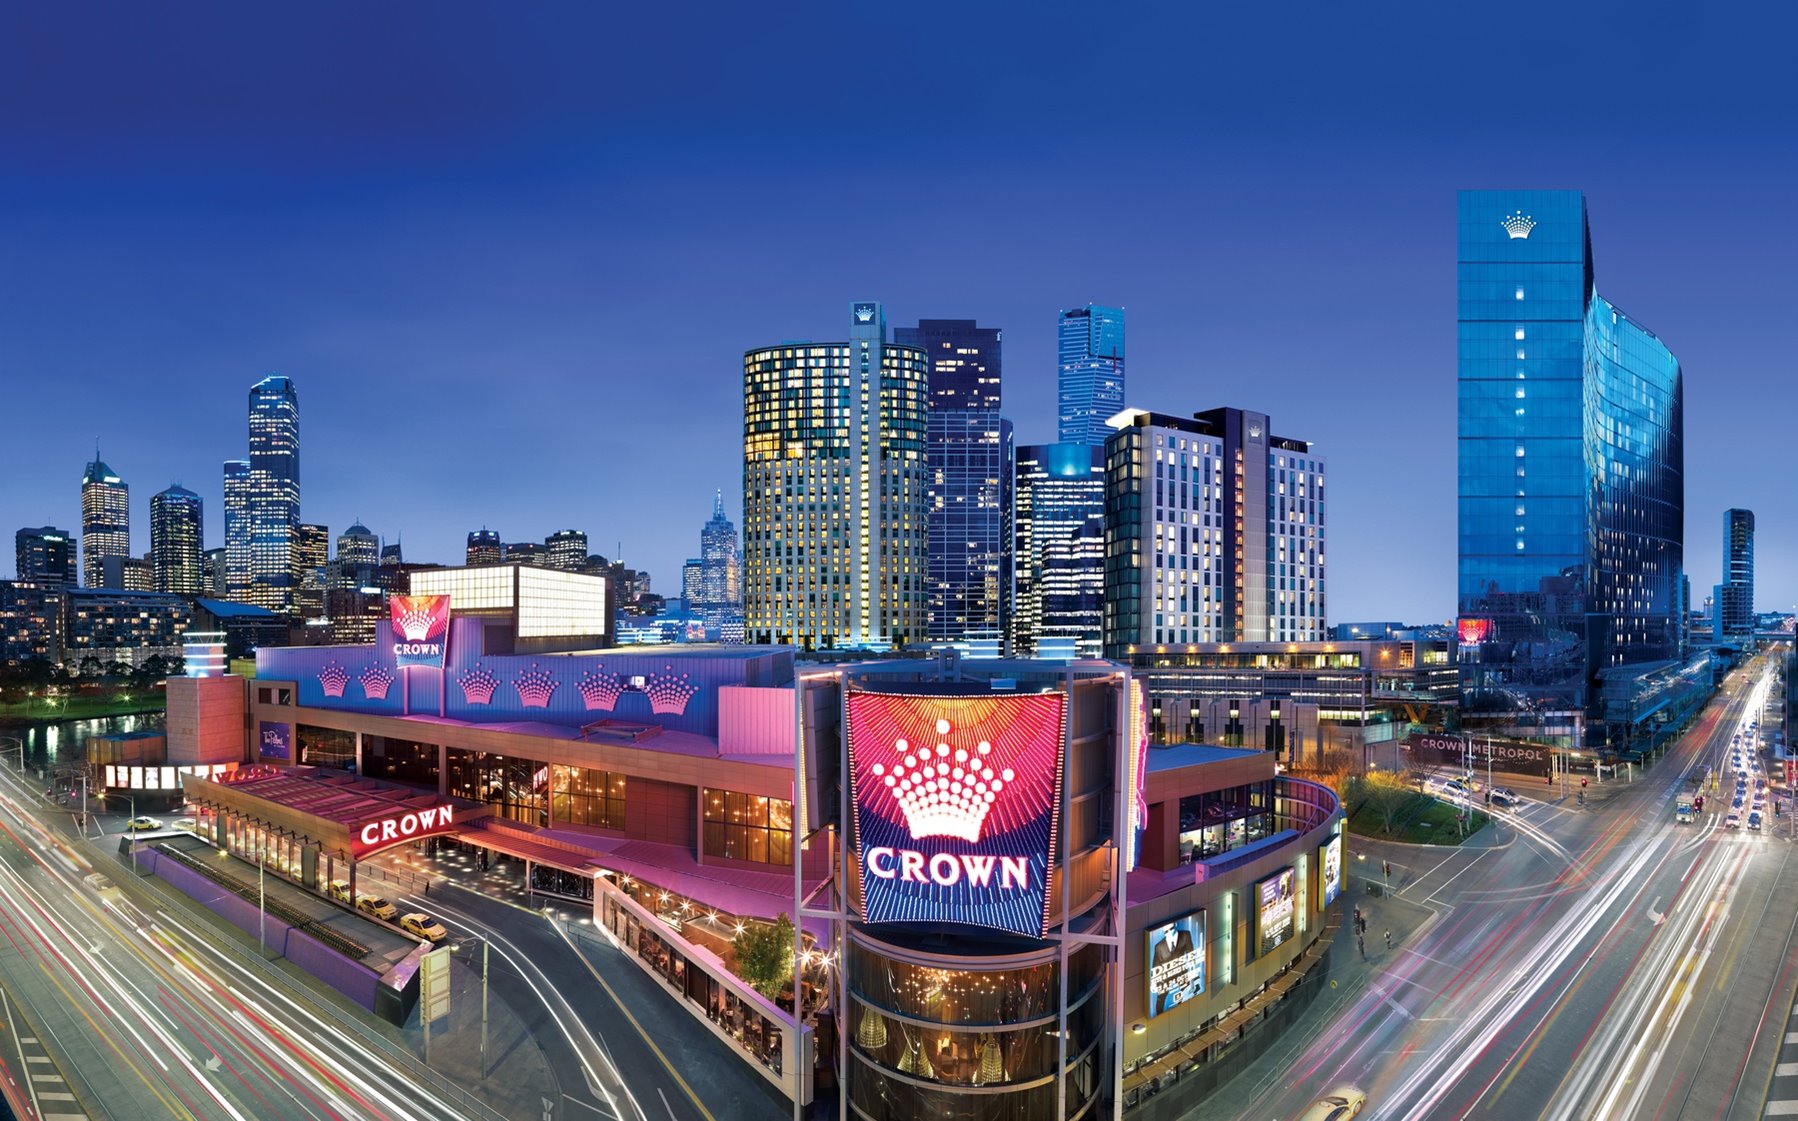 Crown Towers Luxury Hotel & Accommodation - Crown Melbourne